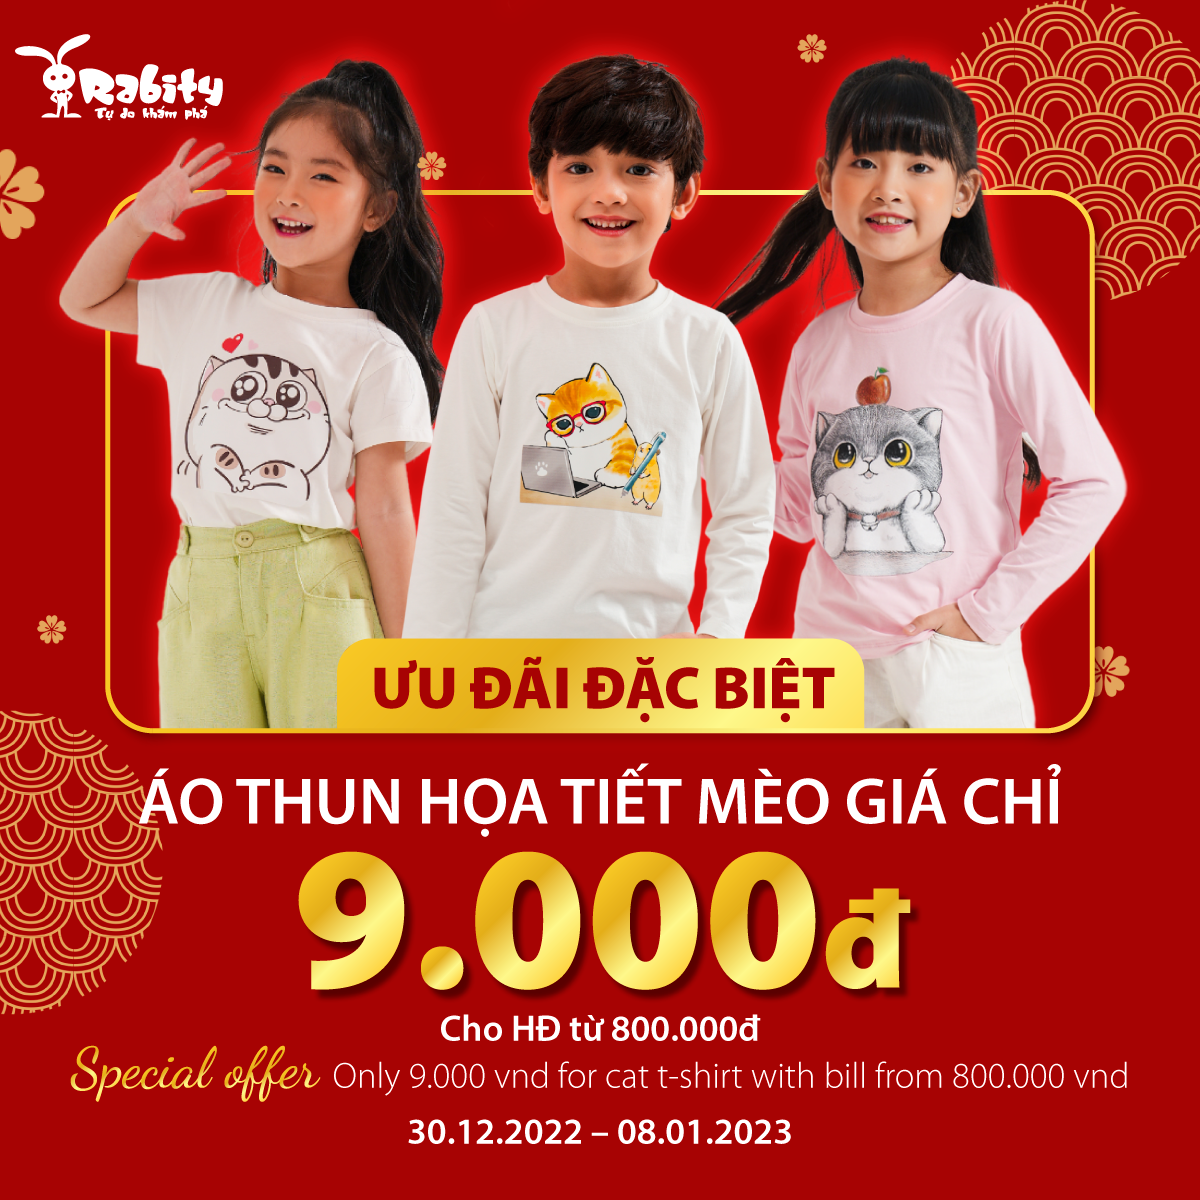 🎁 HAPPY CAT YEAR WITH 9.000 VND LOVELY CAT T-SHIRT 🎁